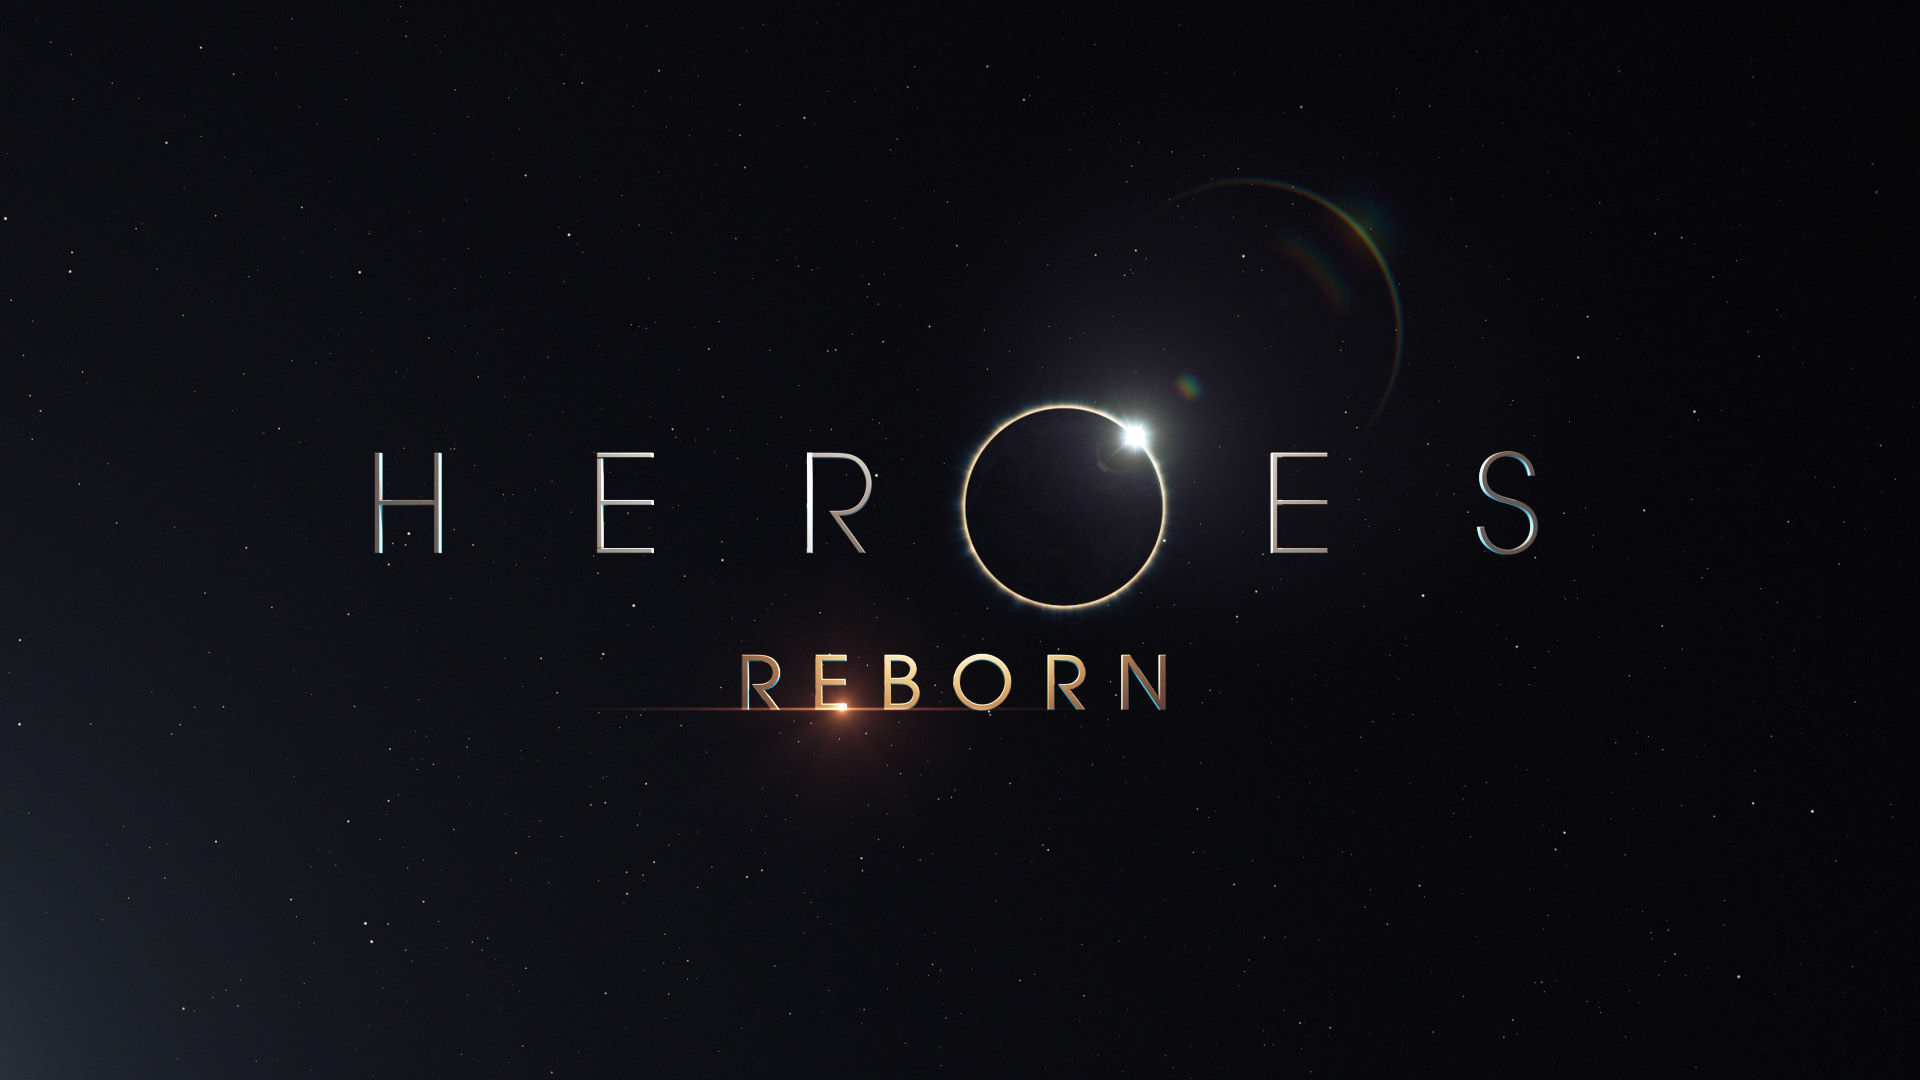 Geek insider, geekinsider, geekinsider. Com,, tv series 'heroes' to be revived, entertainment